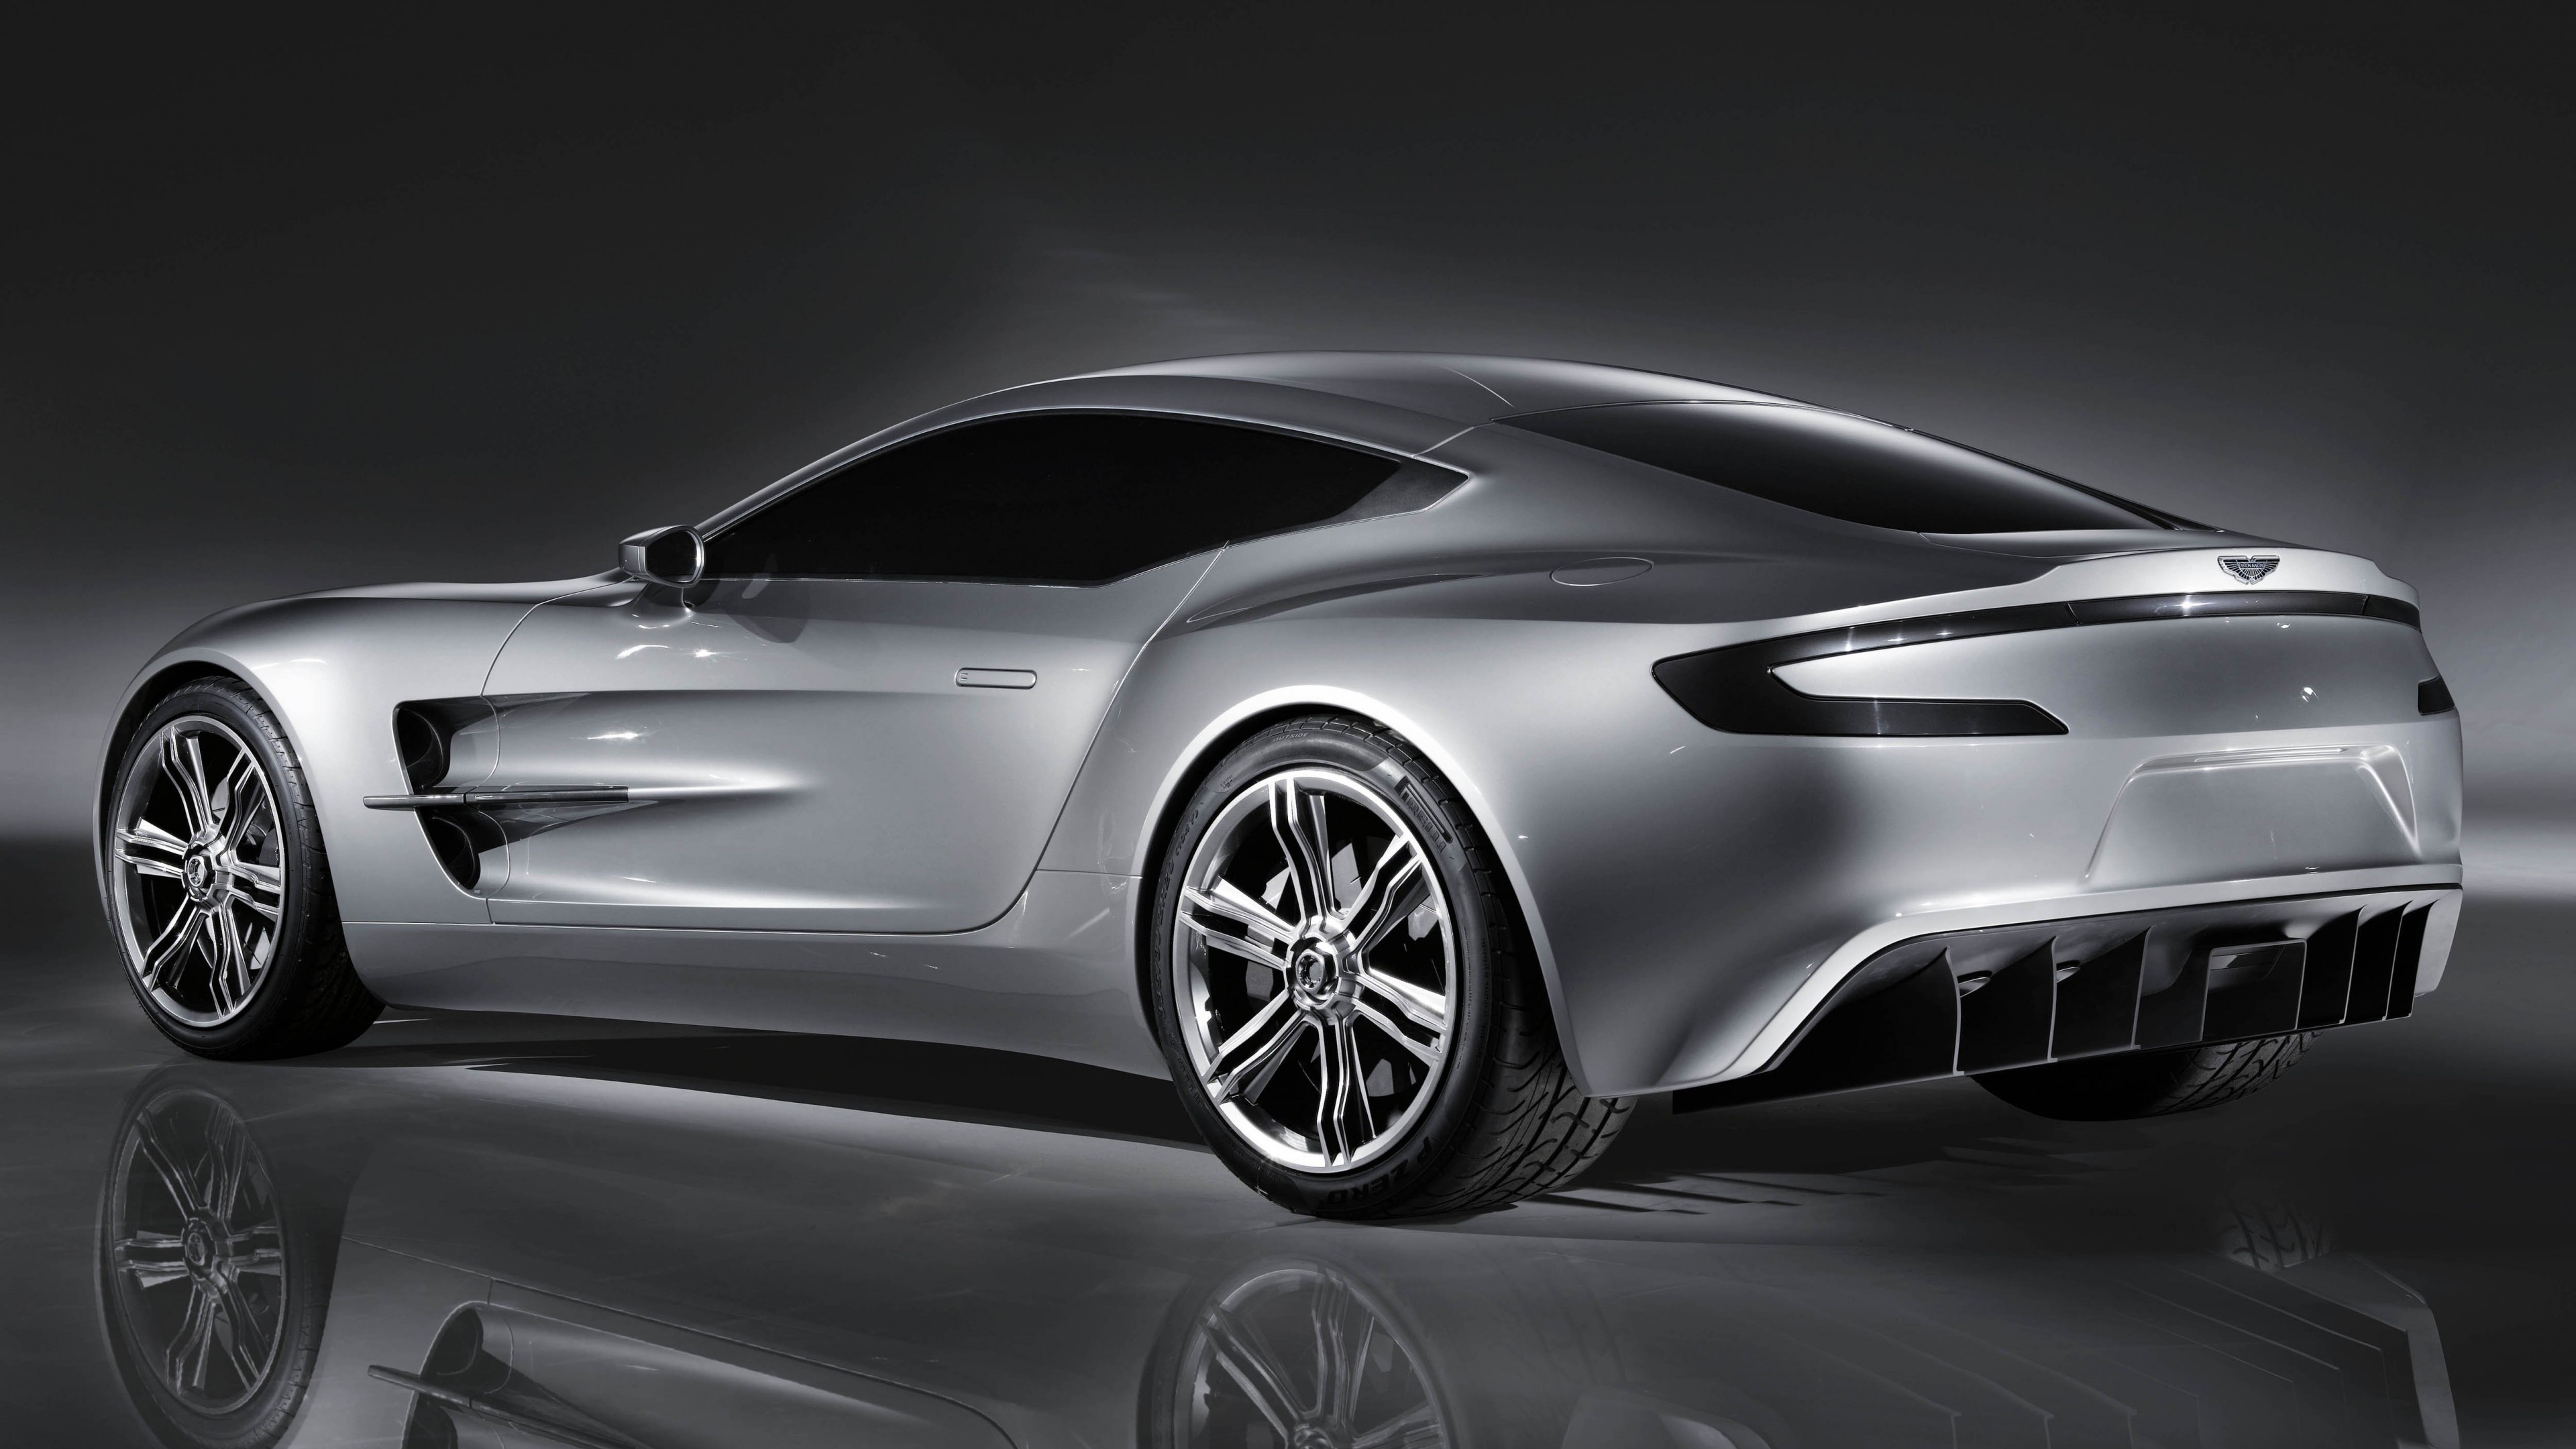 Aston Martin One-77, Supercar limited edition, Luxury cars, Silver back side, 3840x2160 4K Desktop